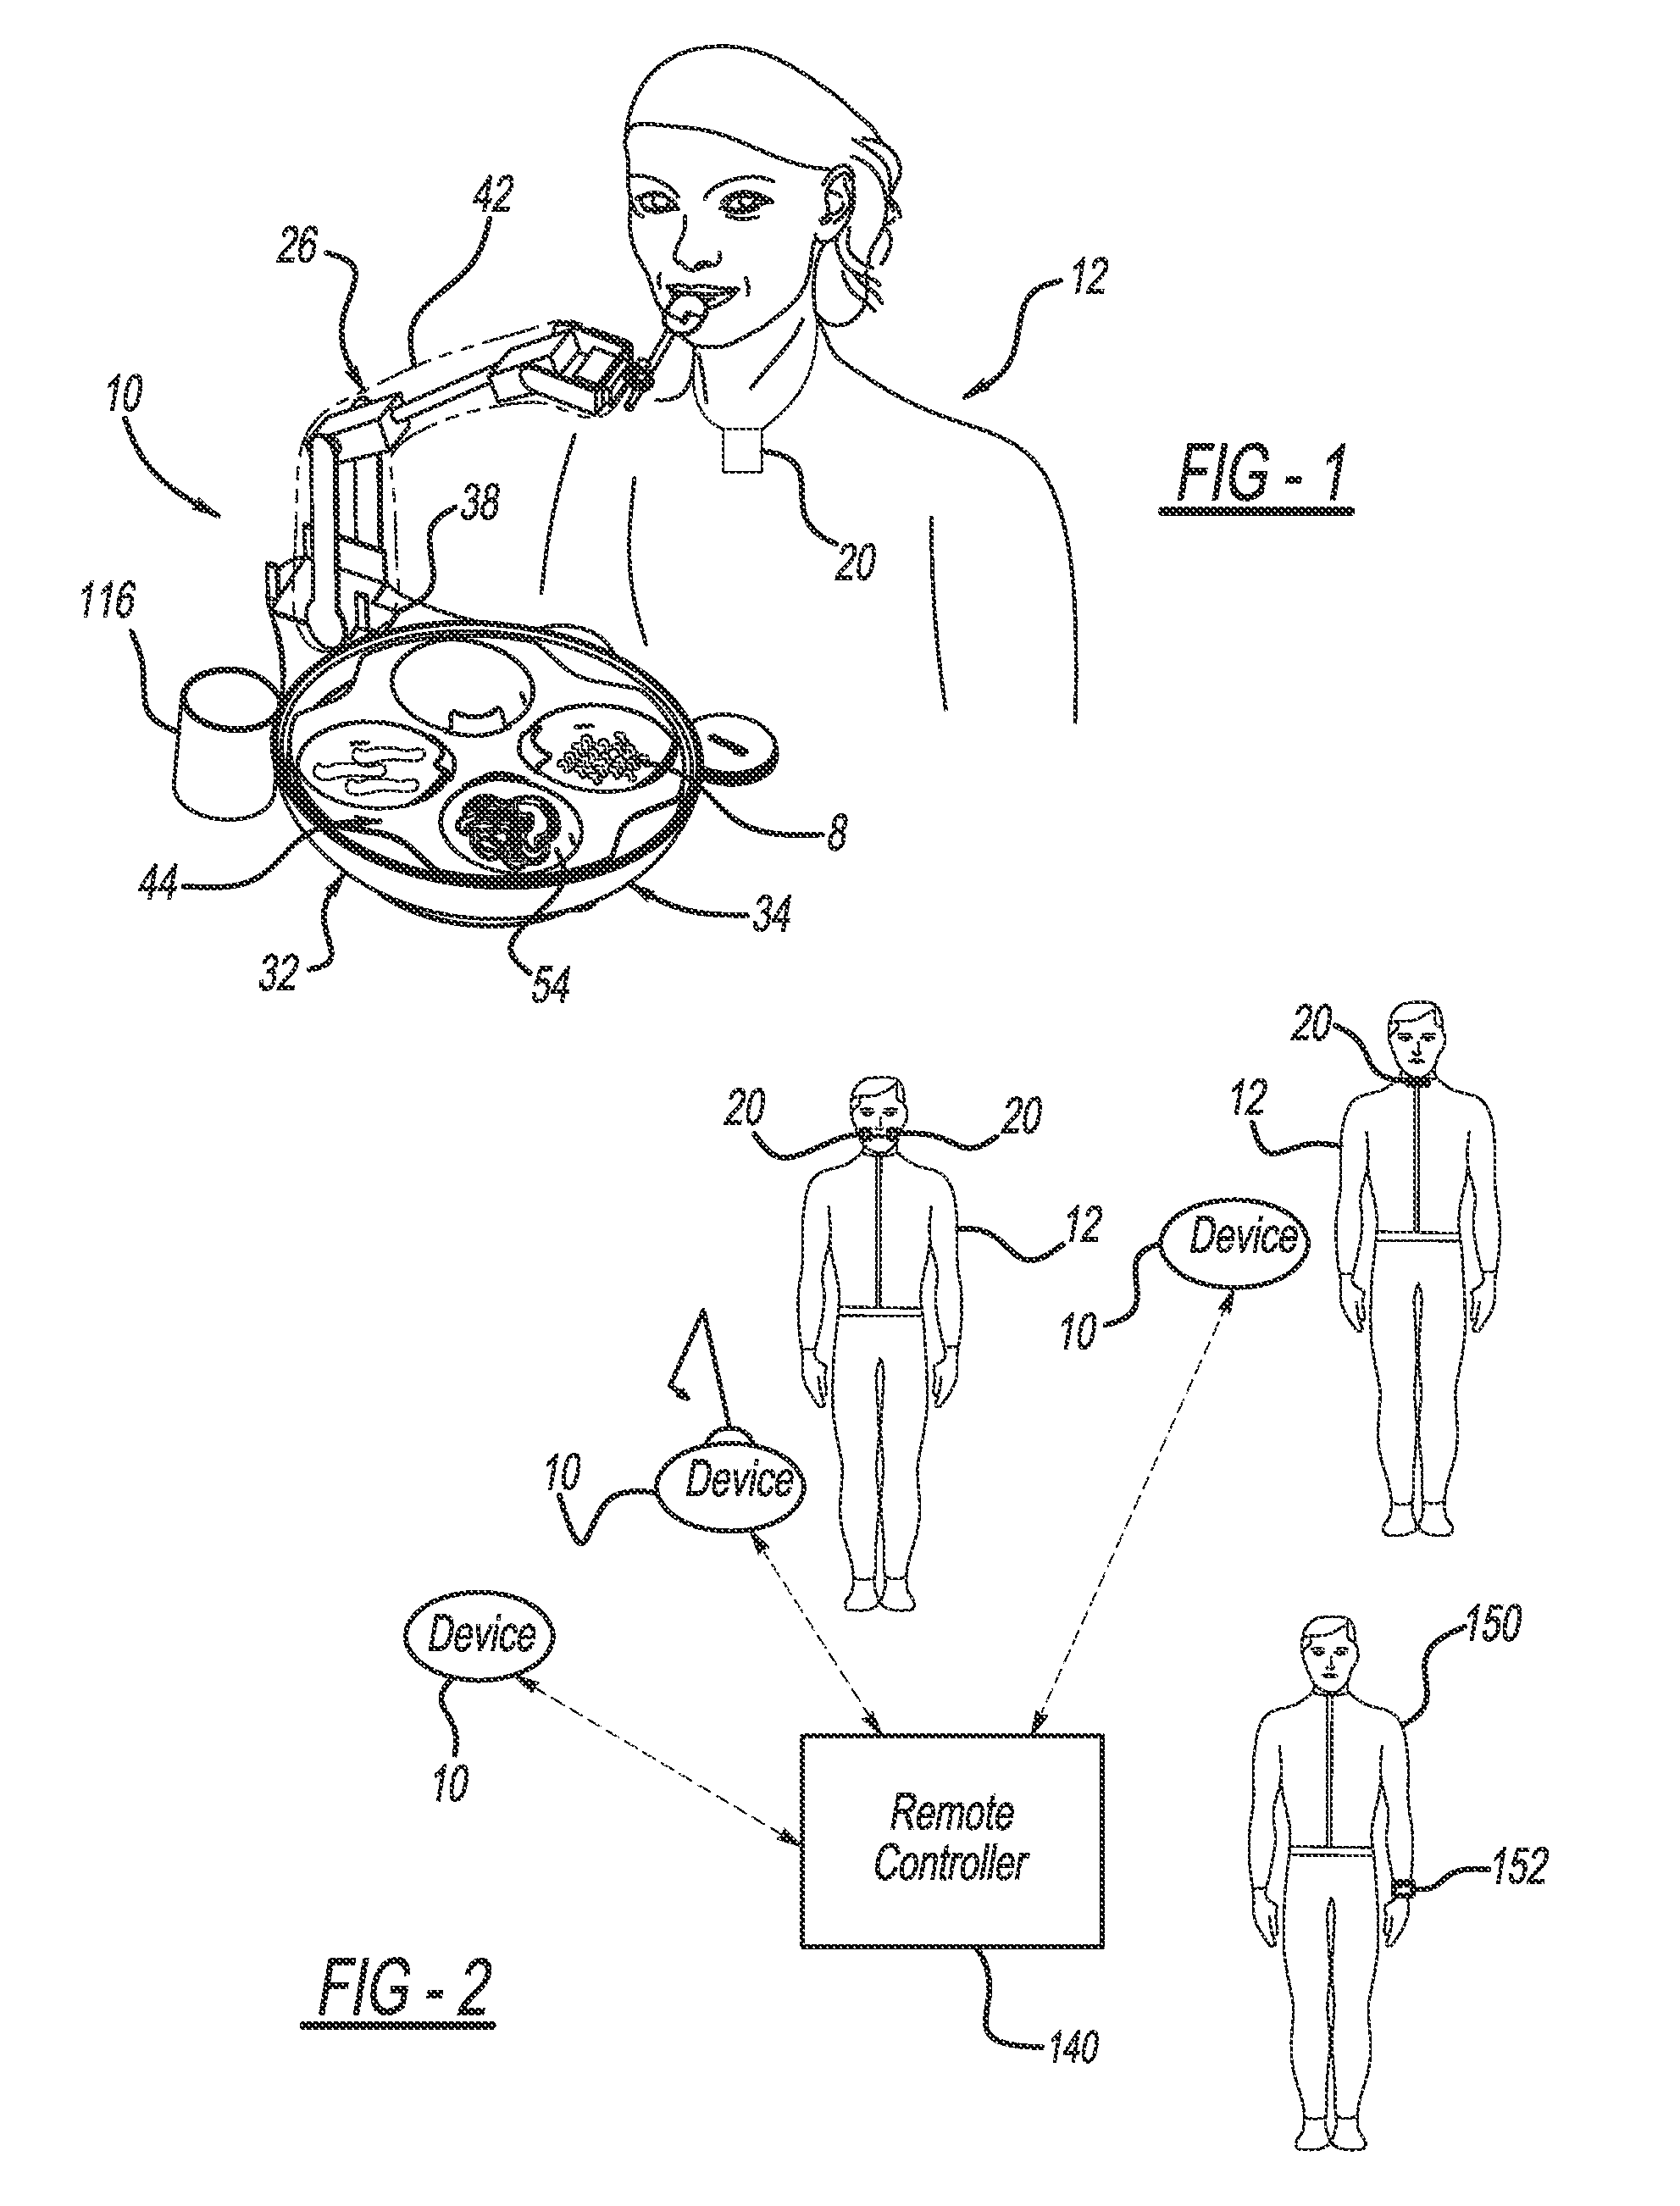 Self-feeding device for an individual